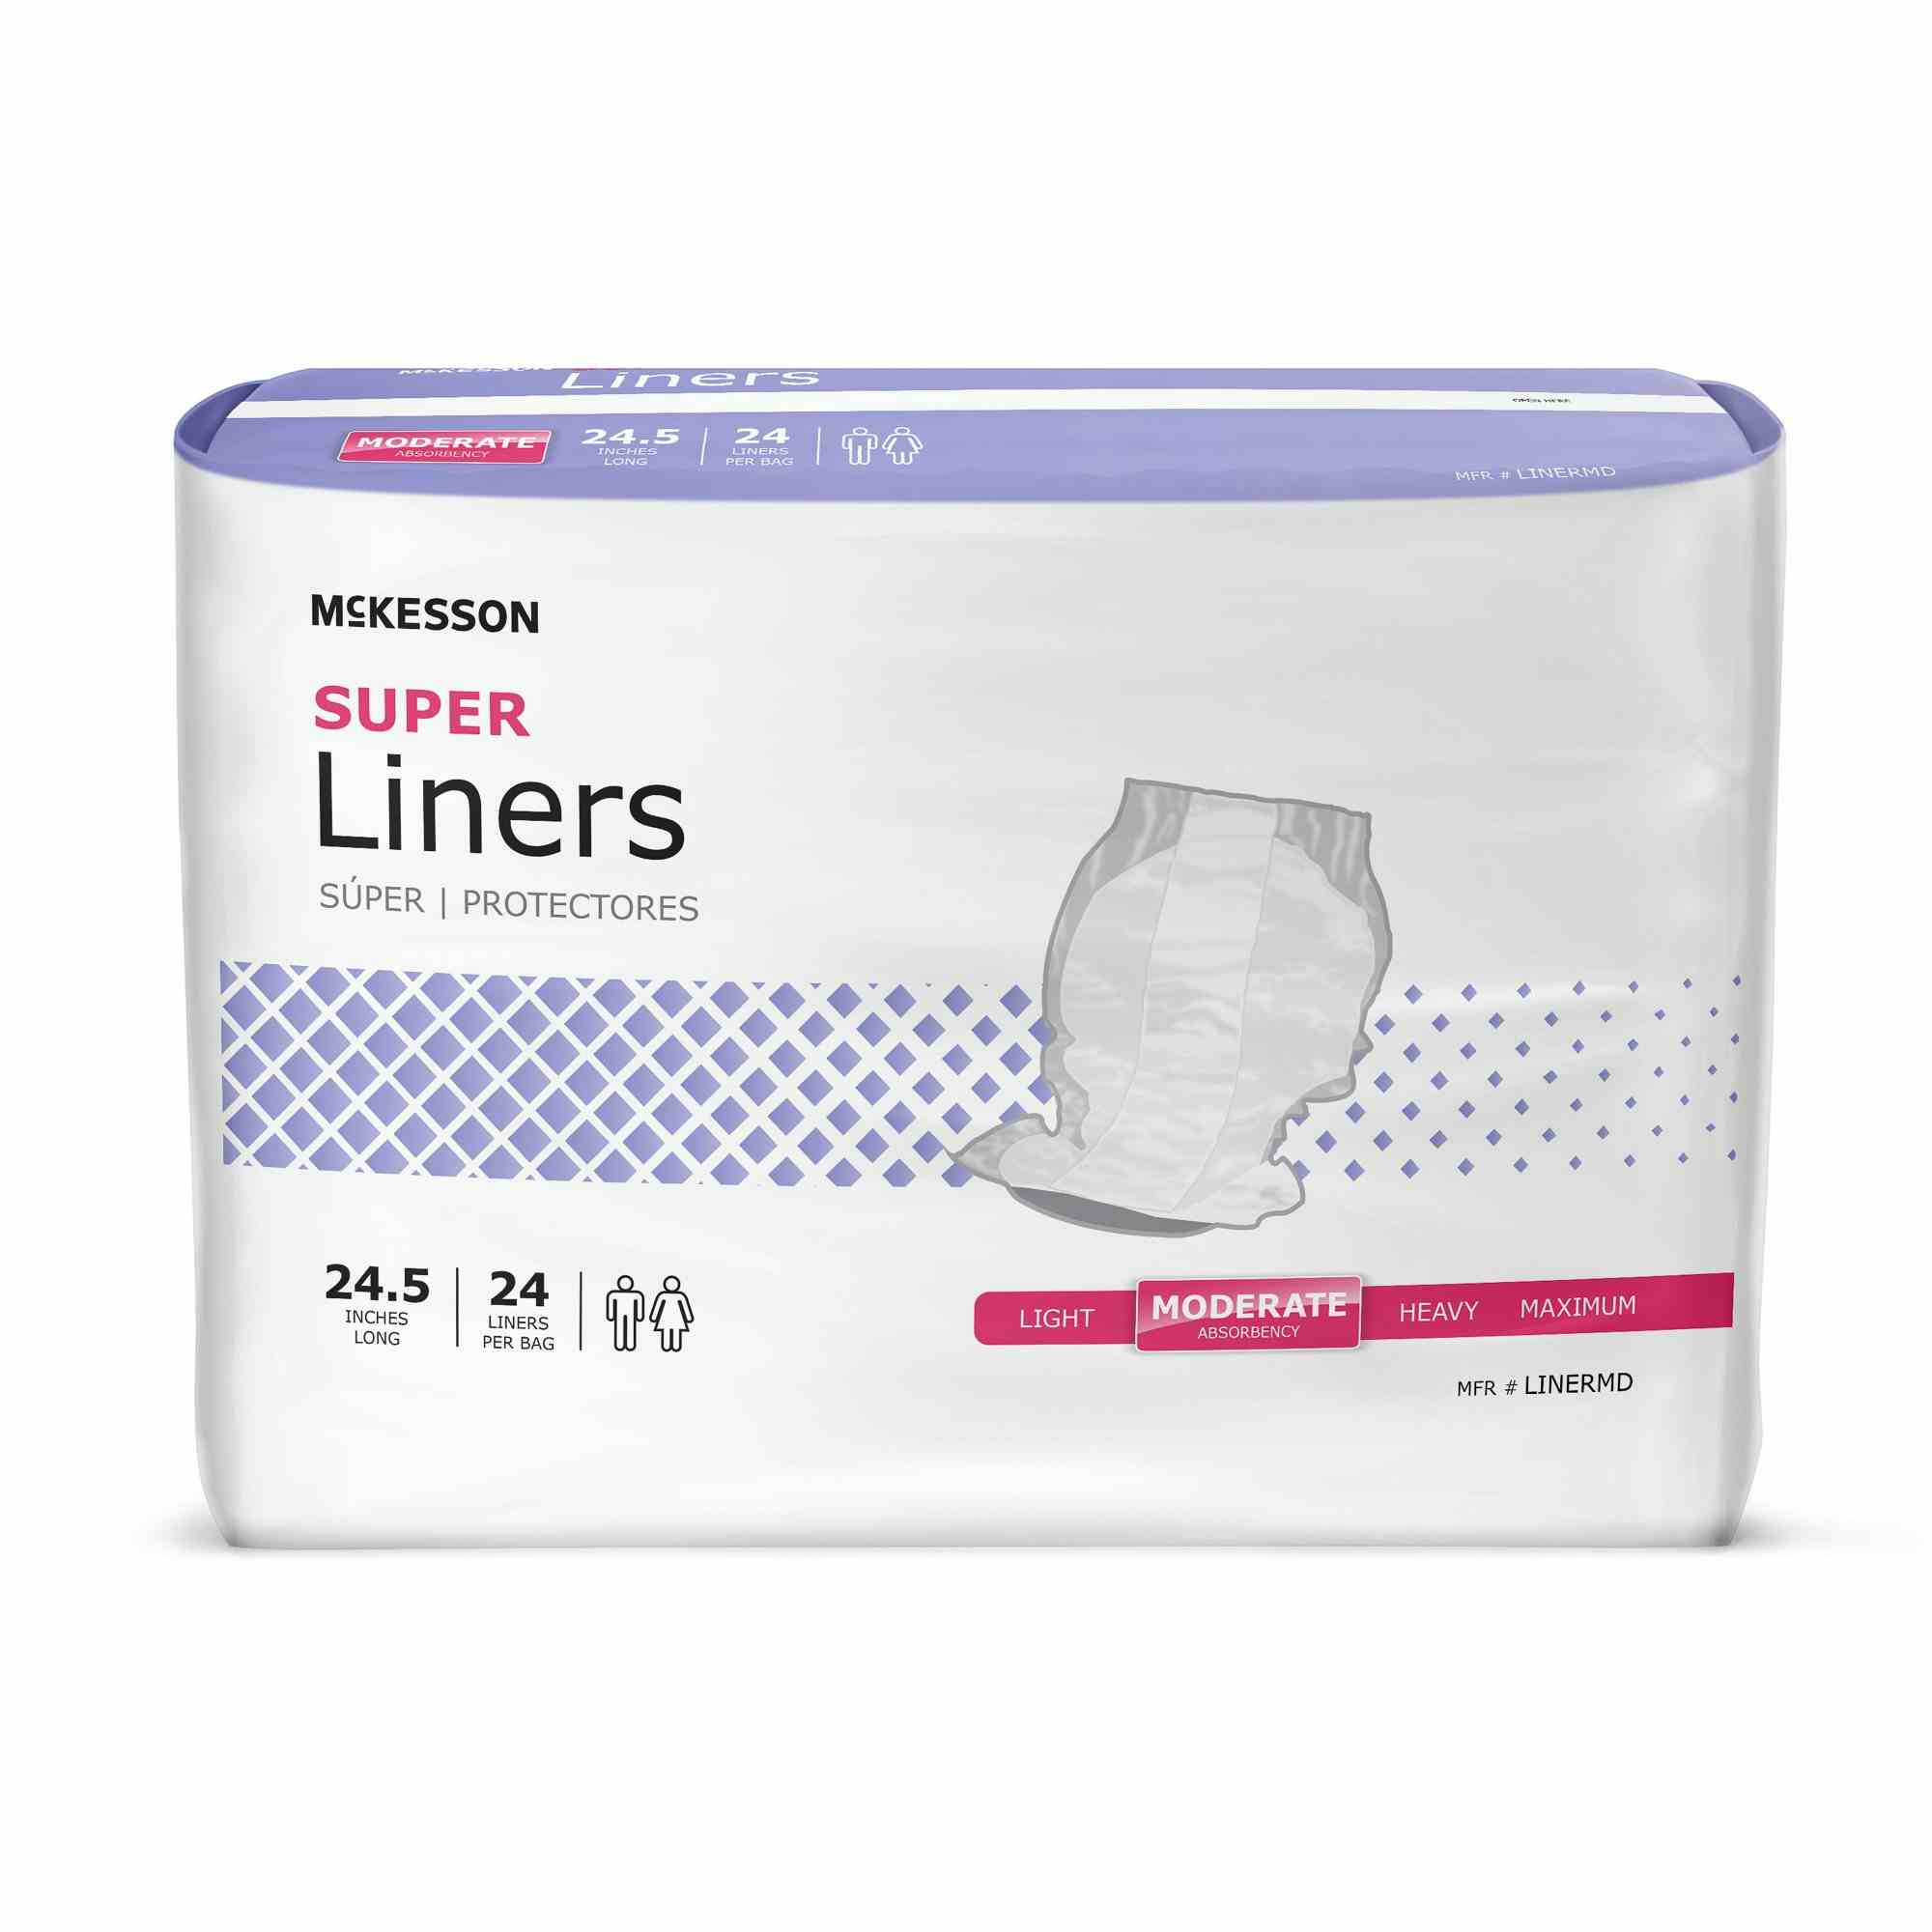 McKesson Classic Disposable Incontinence Liner, Moderate Absorbency, LINERMD, One Size Fits Most - Case of 96